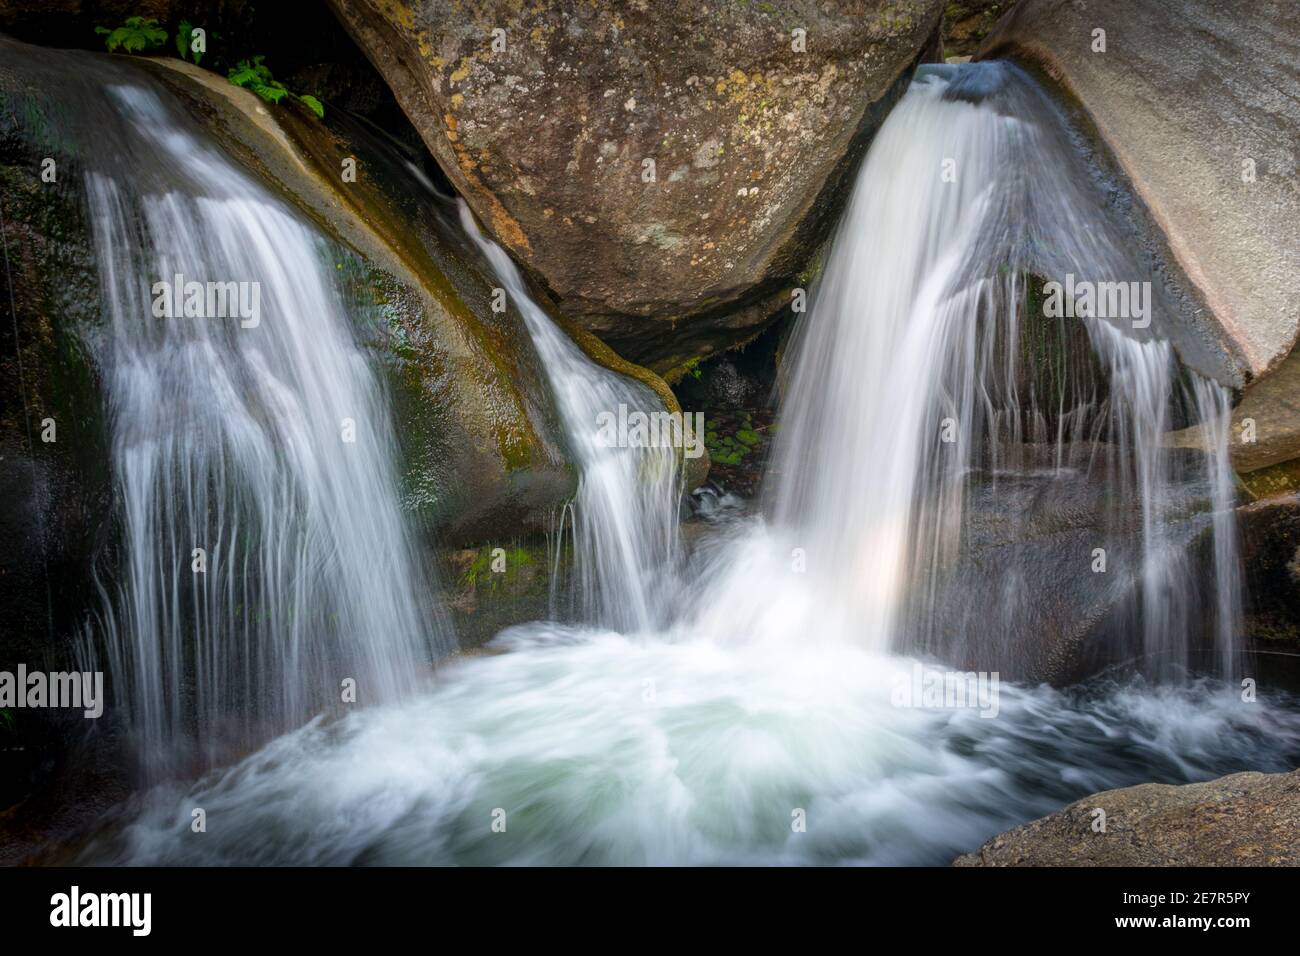 Waterfalls in granite rocks in Sierra de Gredos, Spain. Concept of nature and purity. Stock Photo